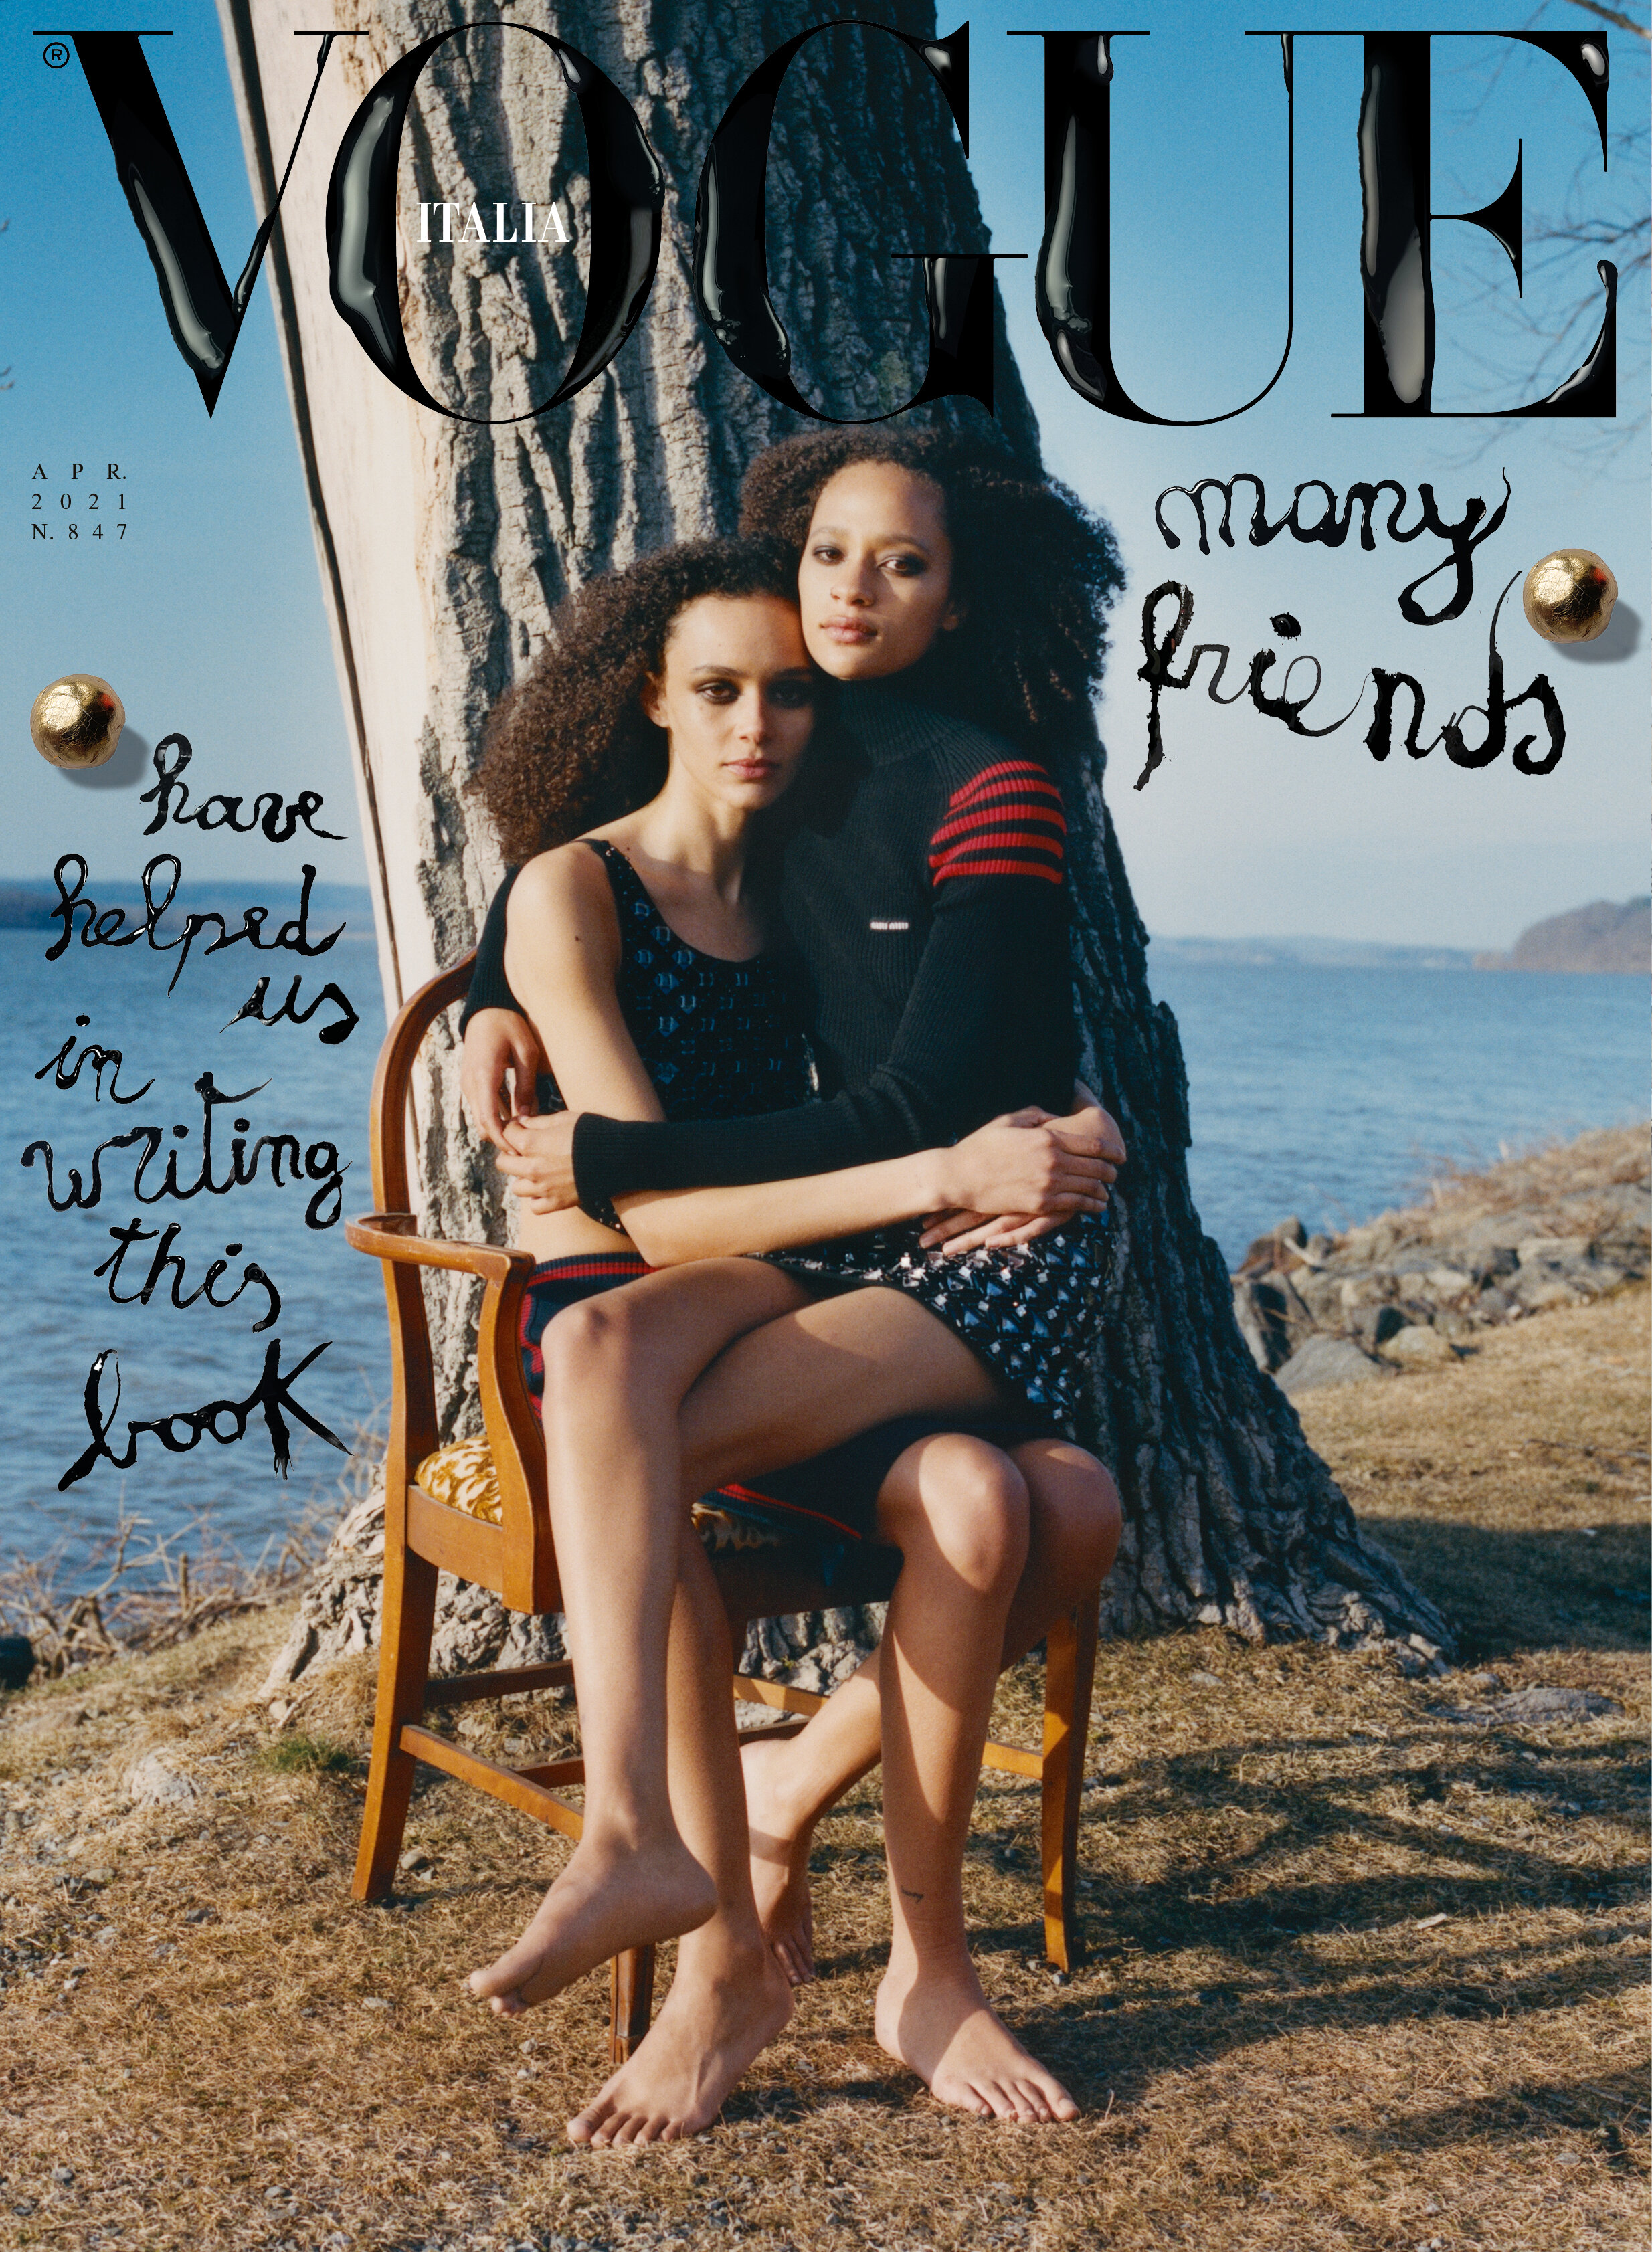   Styling by Carlos Nazario with Binx Walton and Selena Forrest    Vogue Italia April 2021 